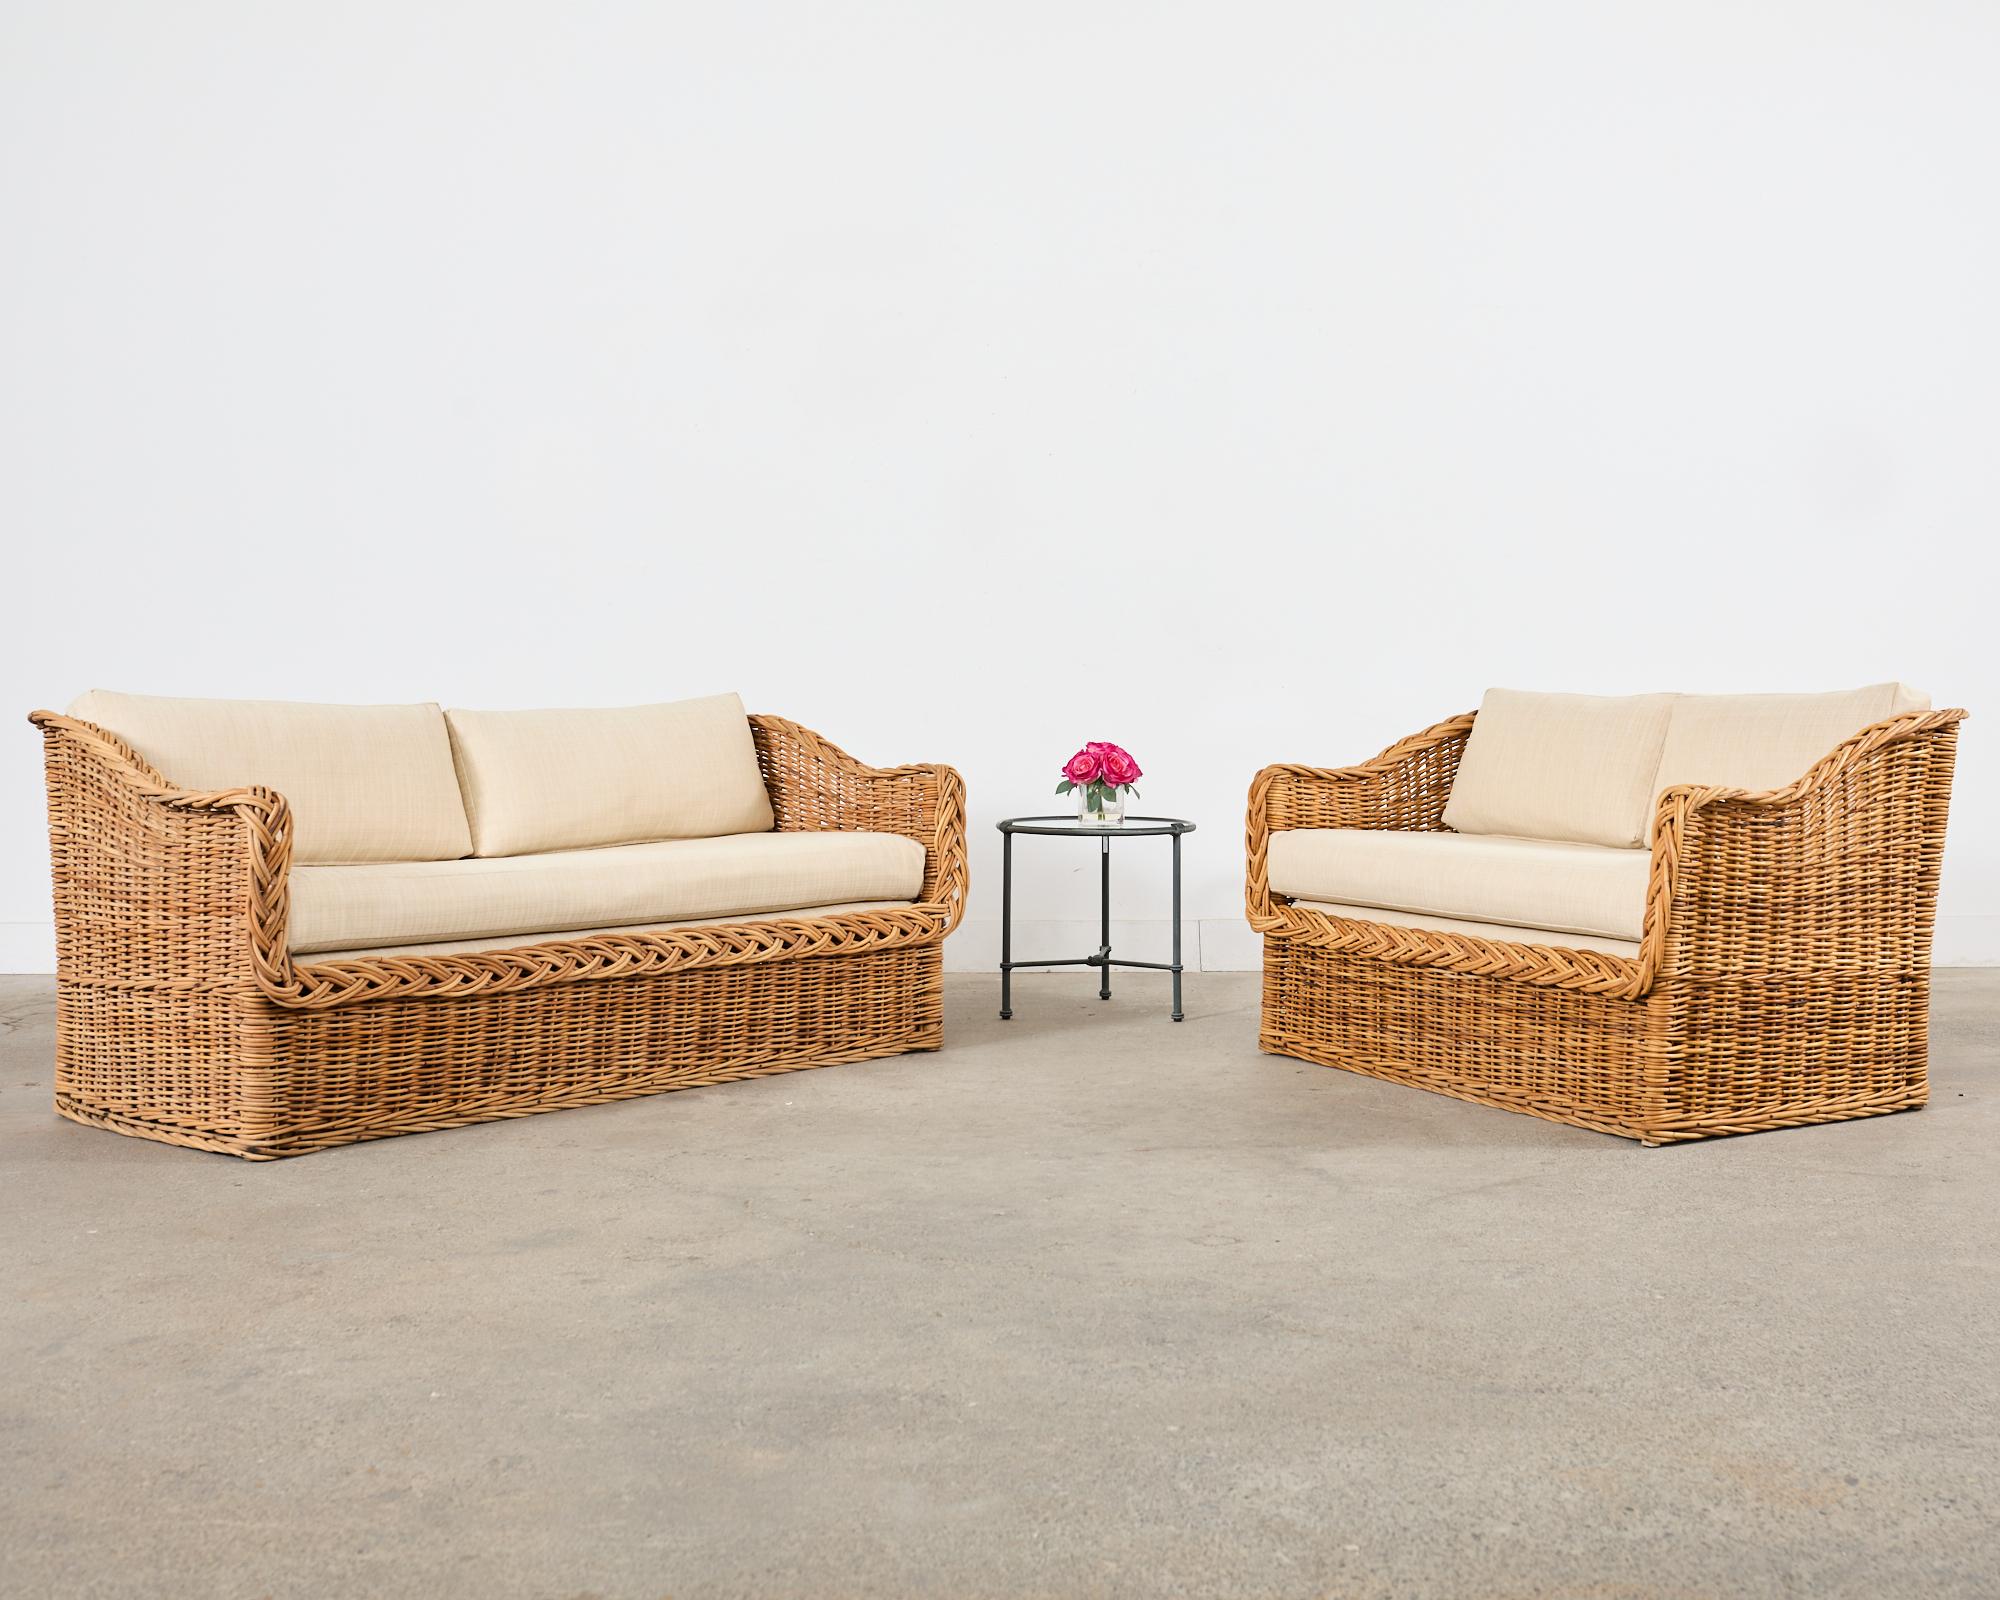 Organic modern rattan loveseat settee hand-crafted by the Wicker Works in Italy. Made in the California coastal manner and style of Michael Taylor designs. Known as the 